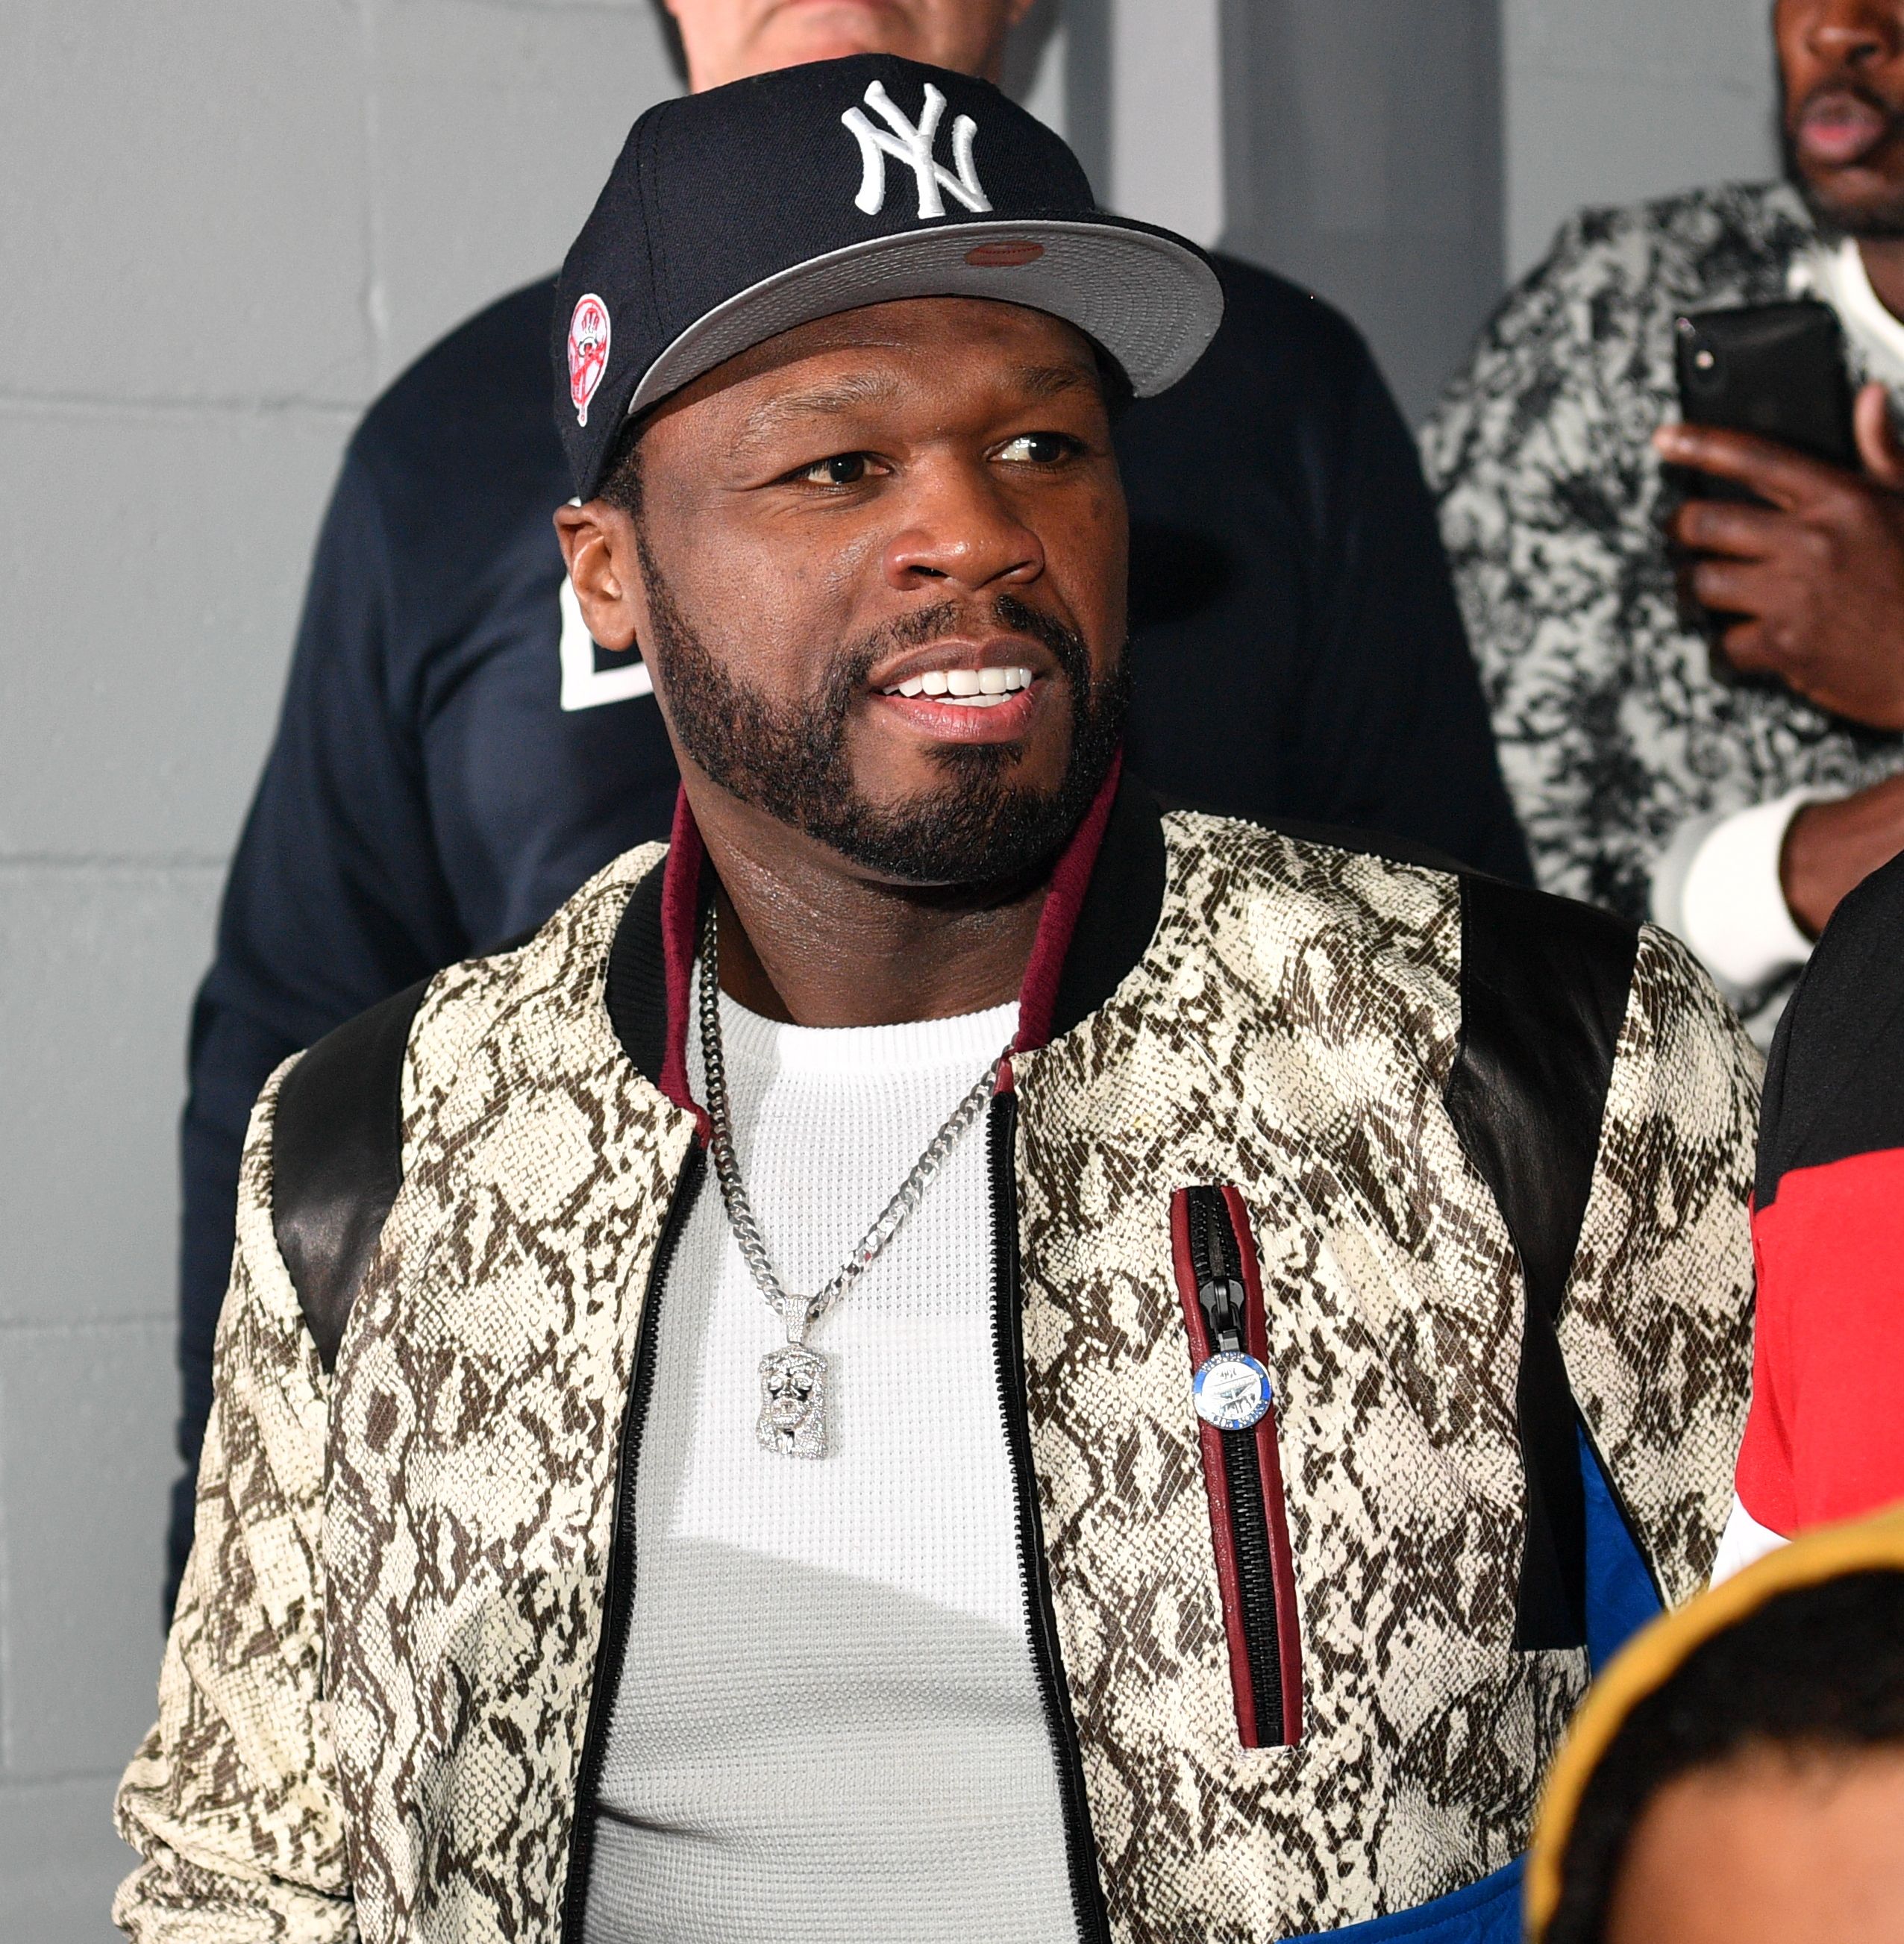 50 Cent attends The Grand Opening of Kiss Ultra Lounge Hosted by 50 Cent at Kiss Ultra Lounge on March 8, 2019 in Atlanta, Georgia. | Source: Getty Images